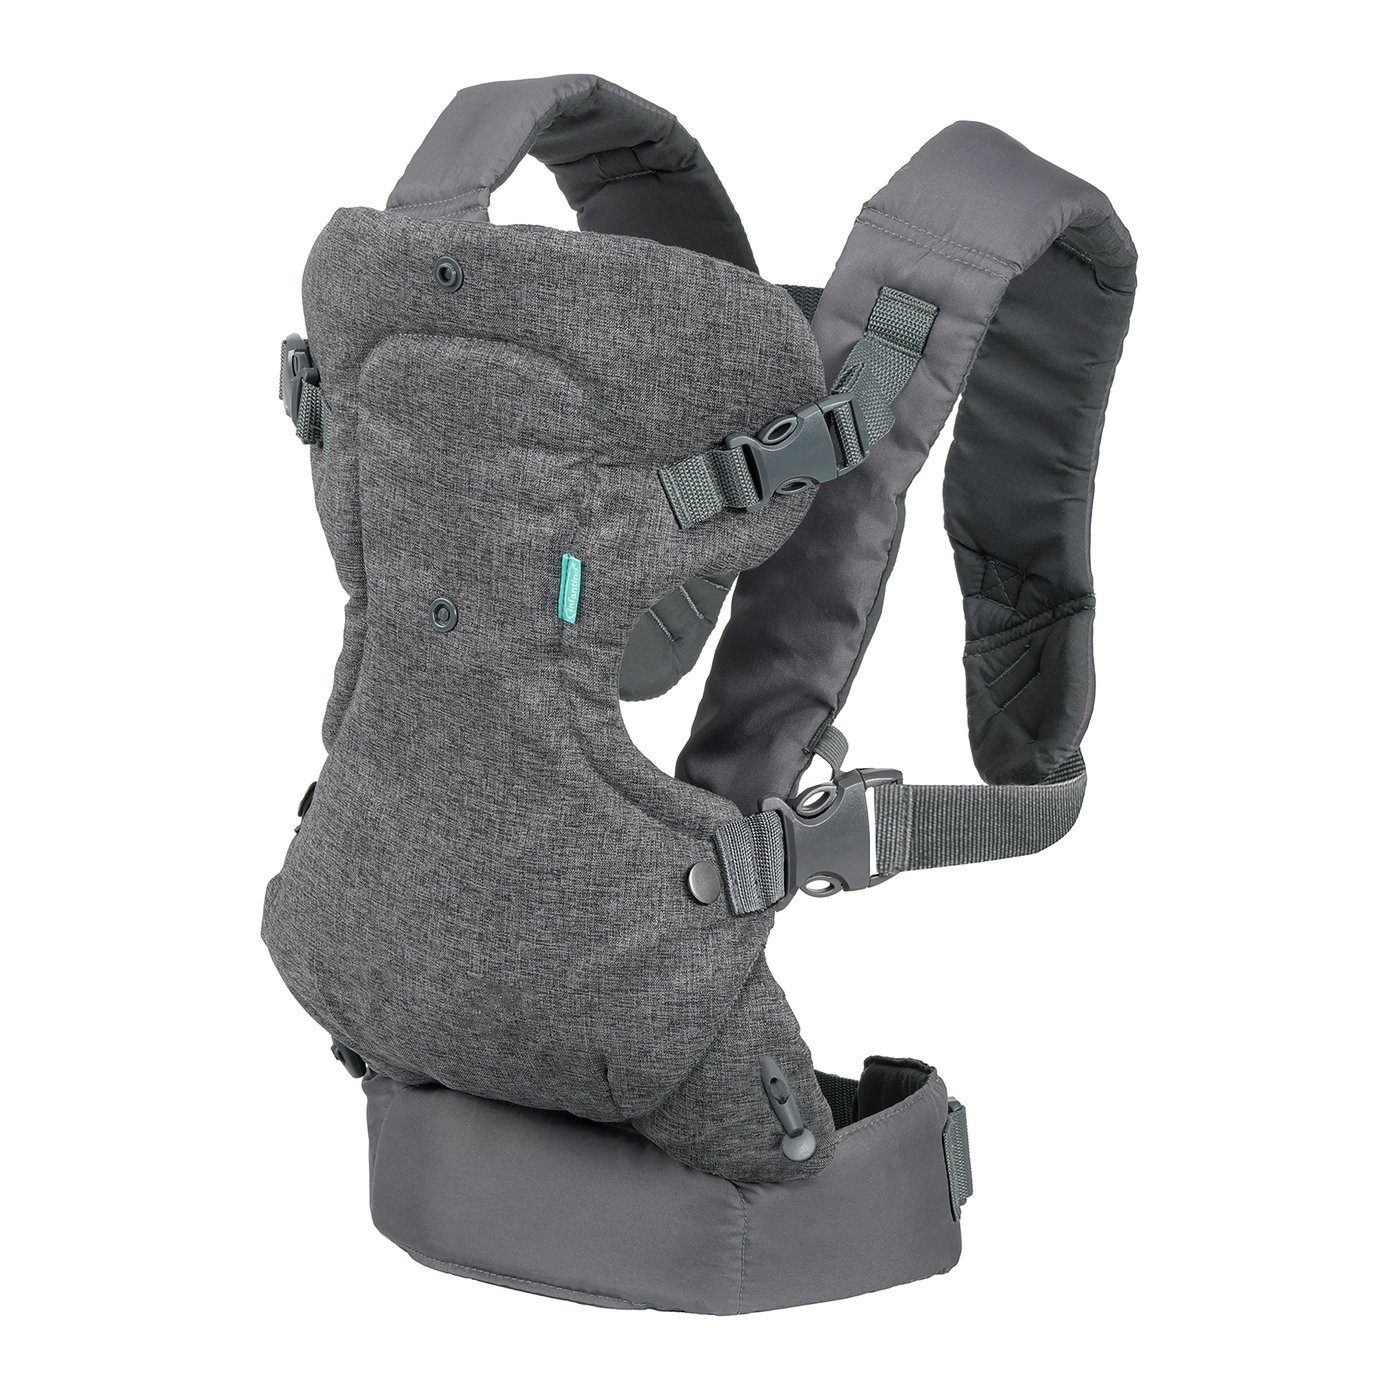 Infantino Flip Ergo 4-in-1 Baby Carrier Review